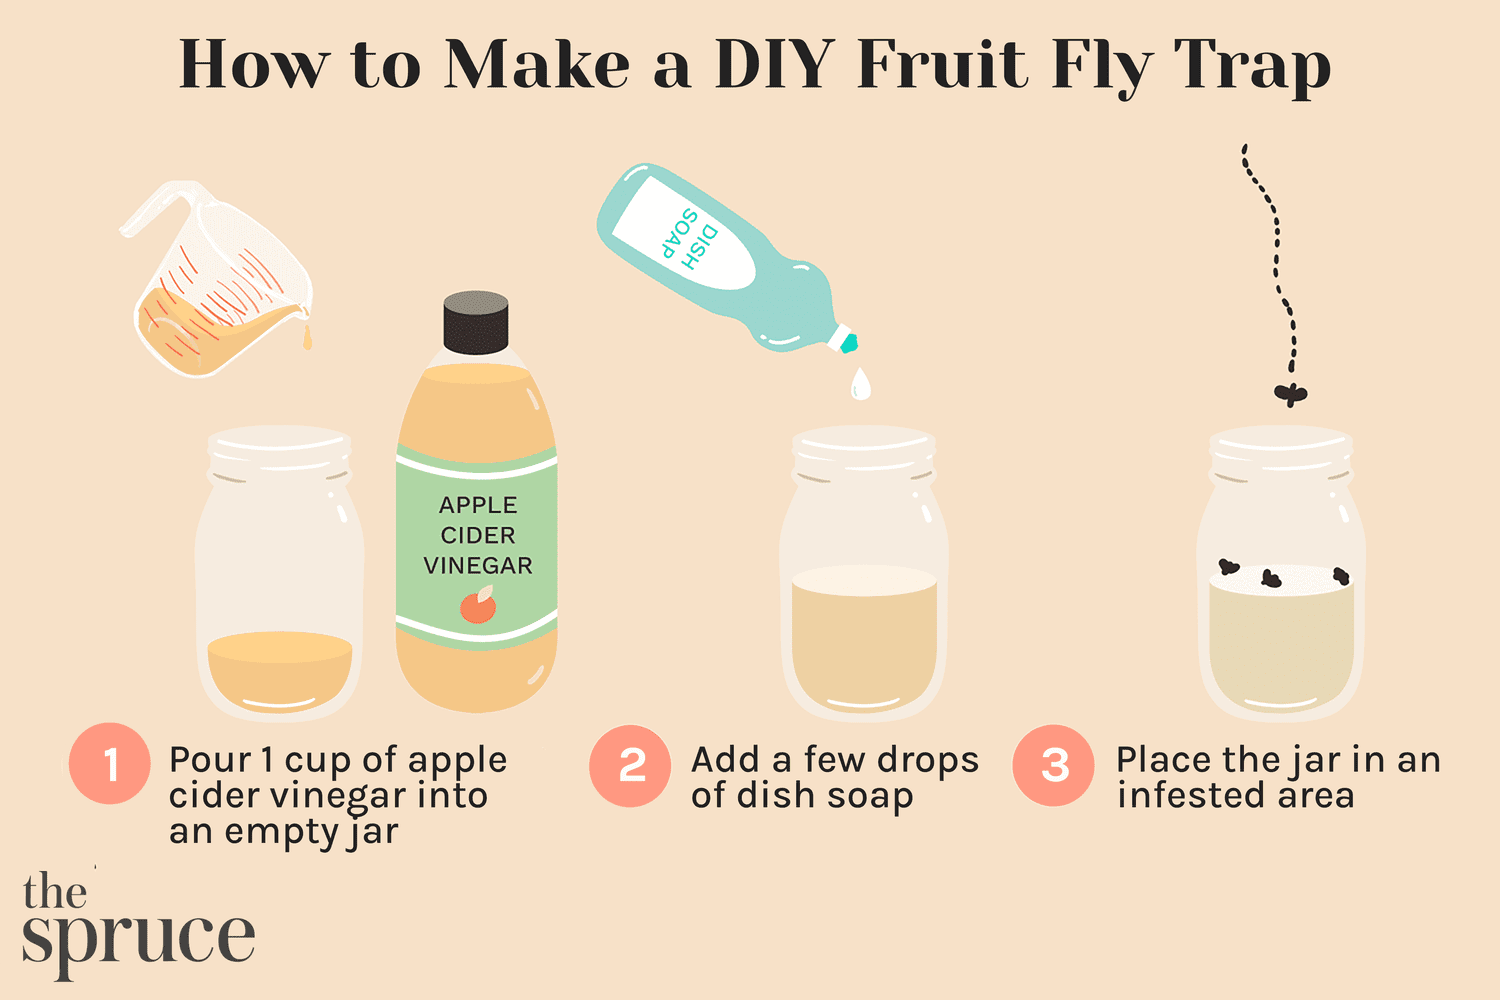 How long does it take to get rid of fruit flies